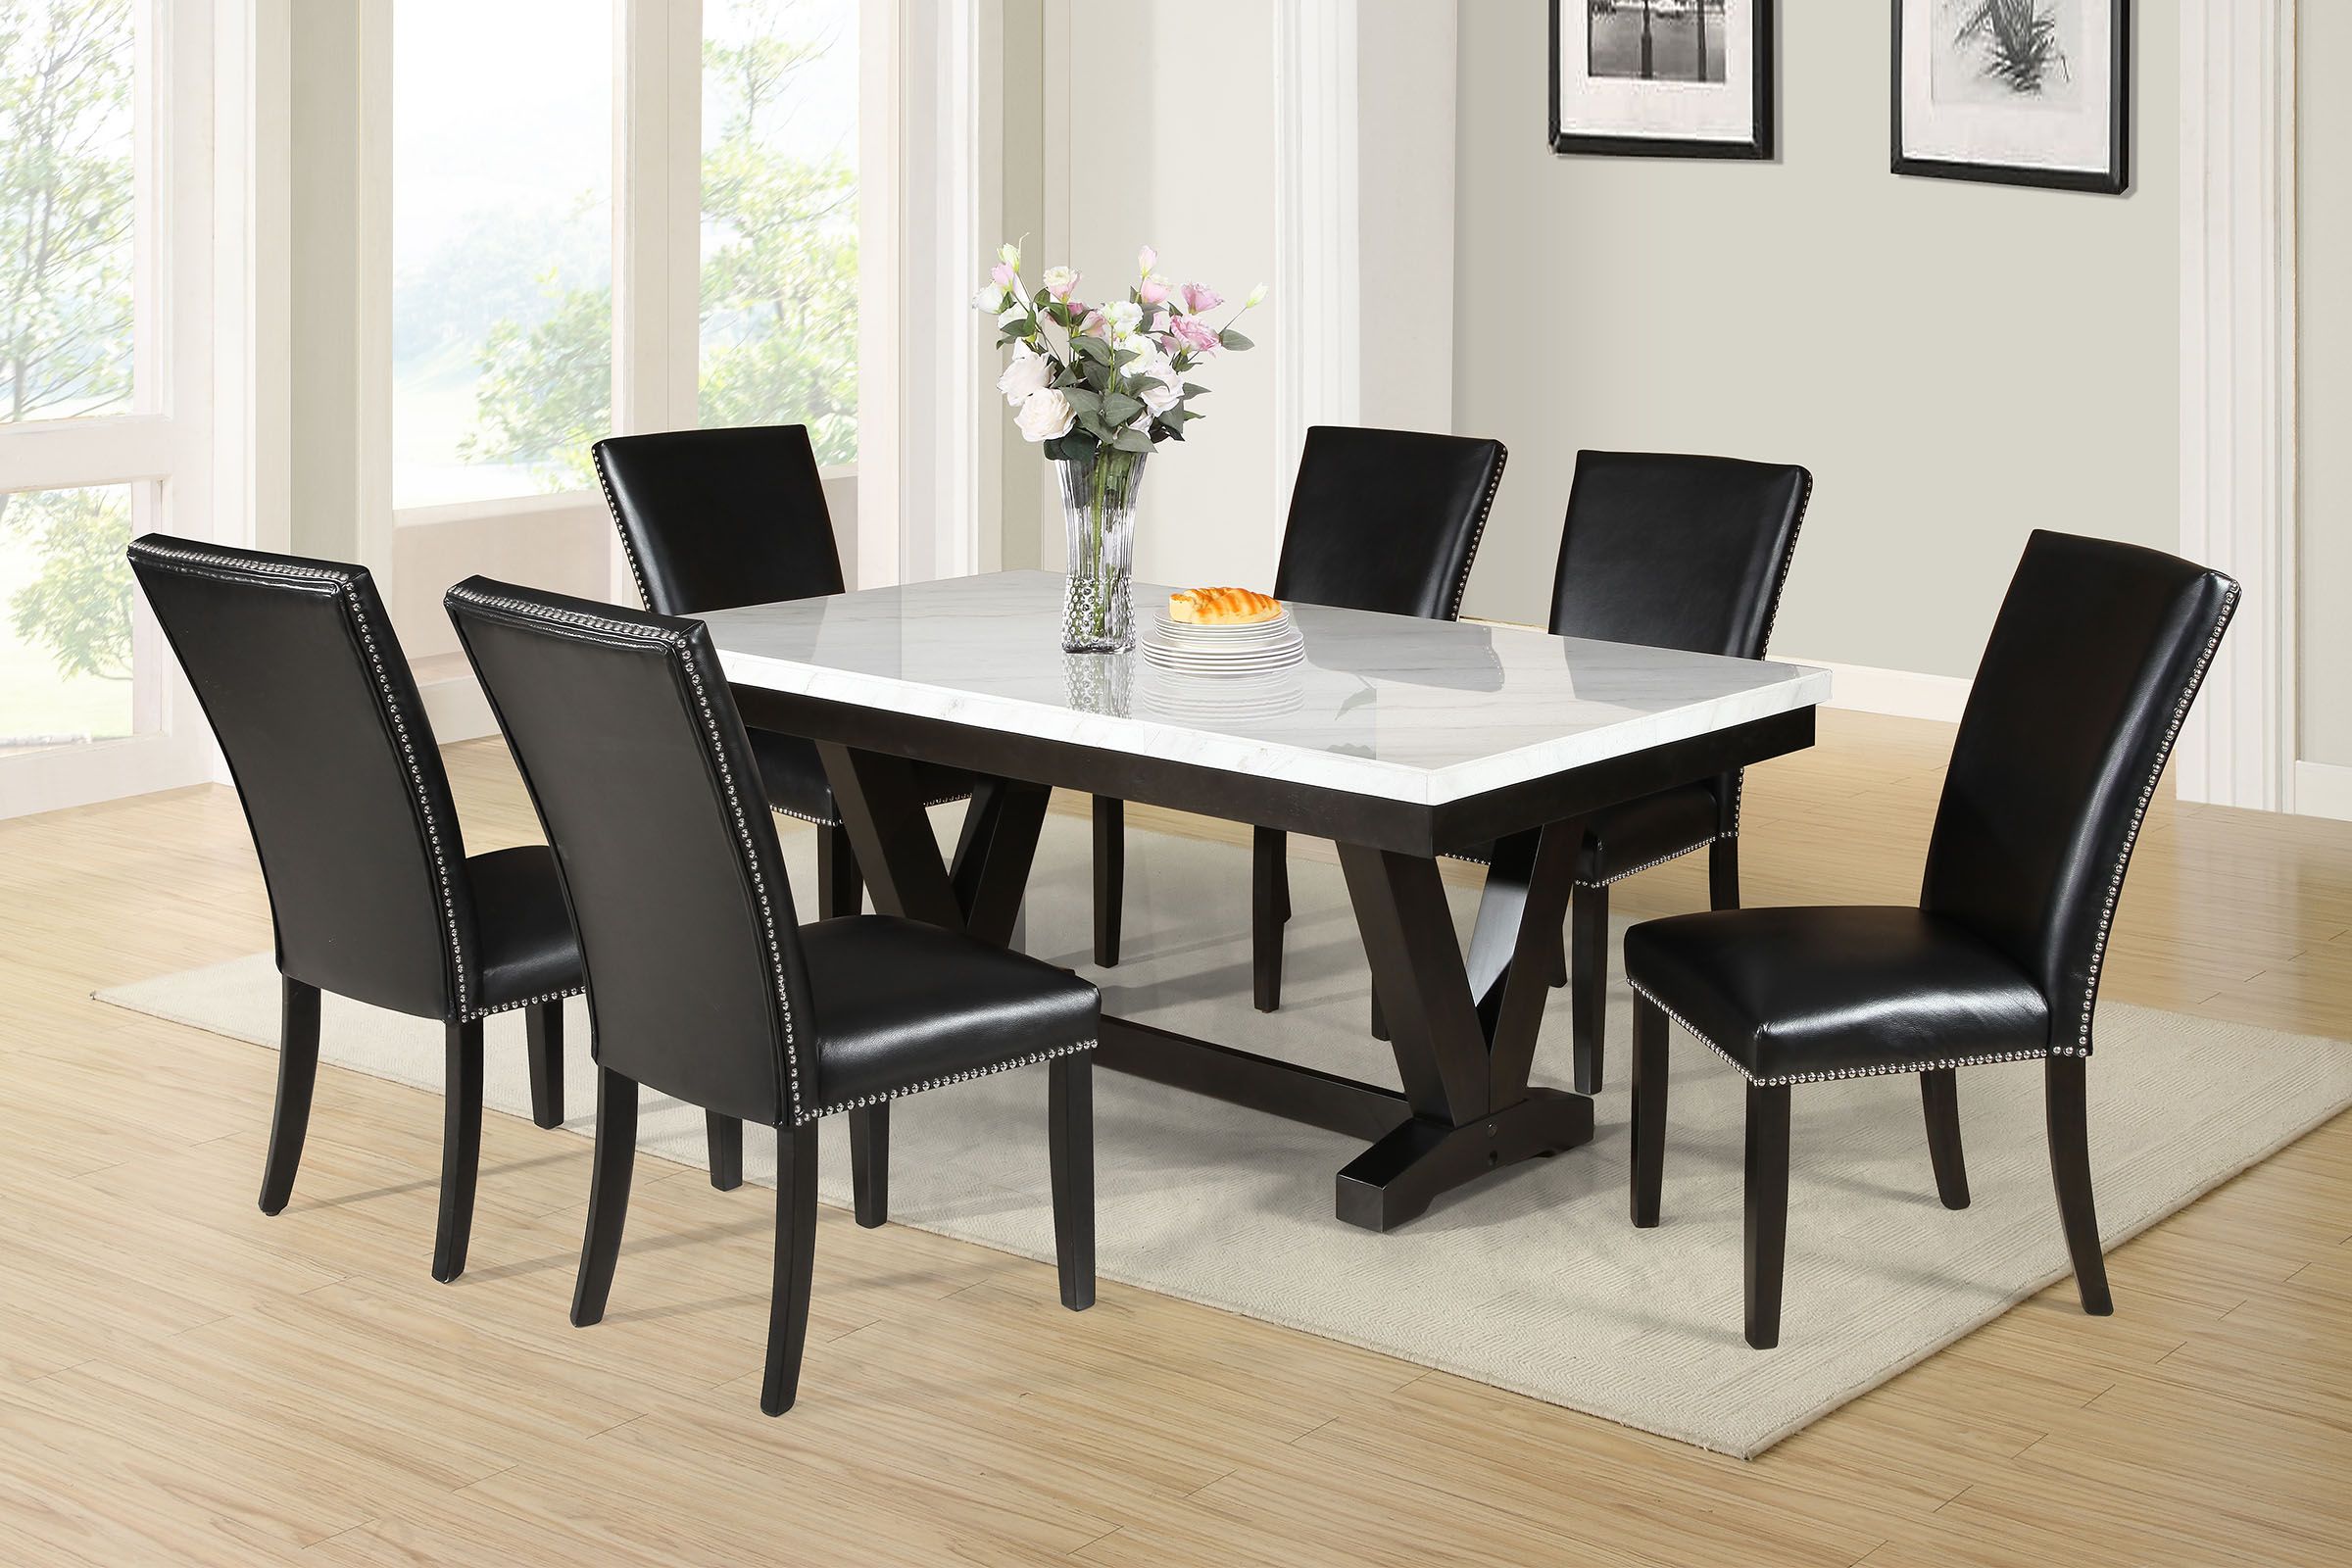 Finley Rectangular Table + 6 Chairs